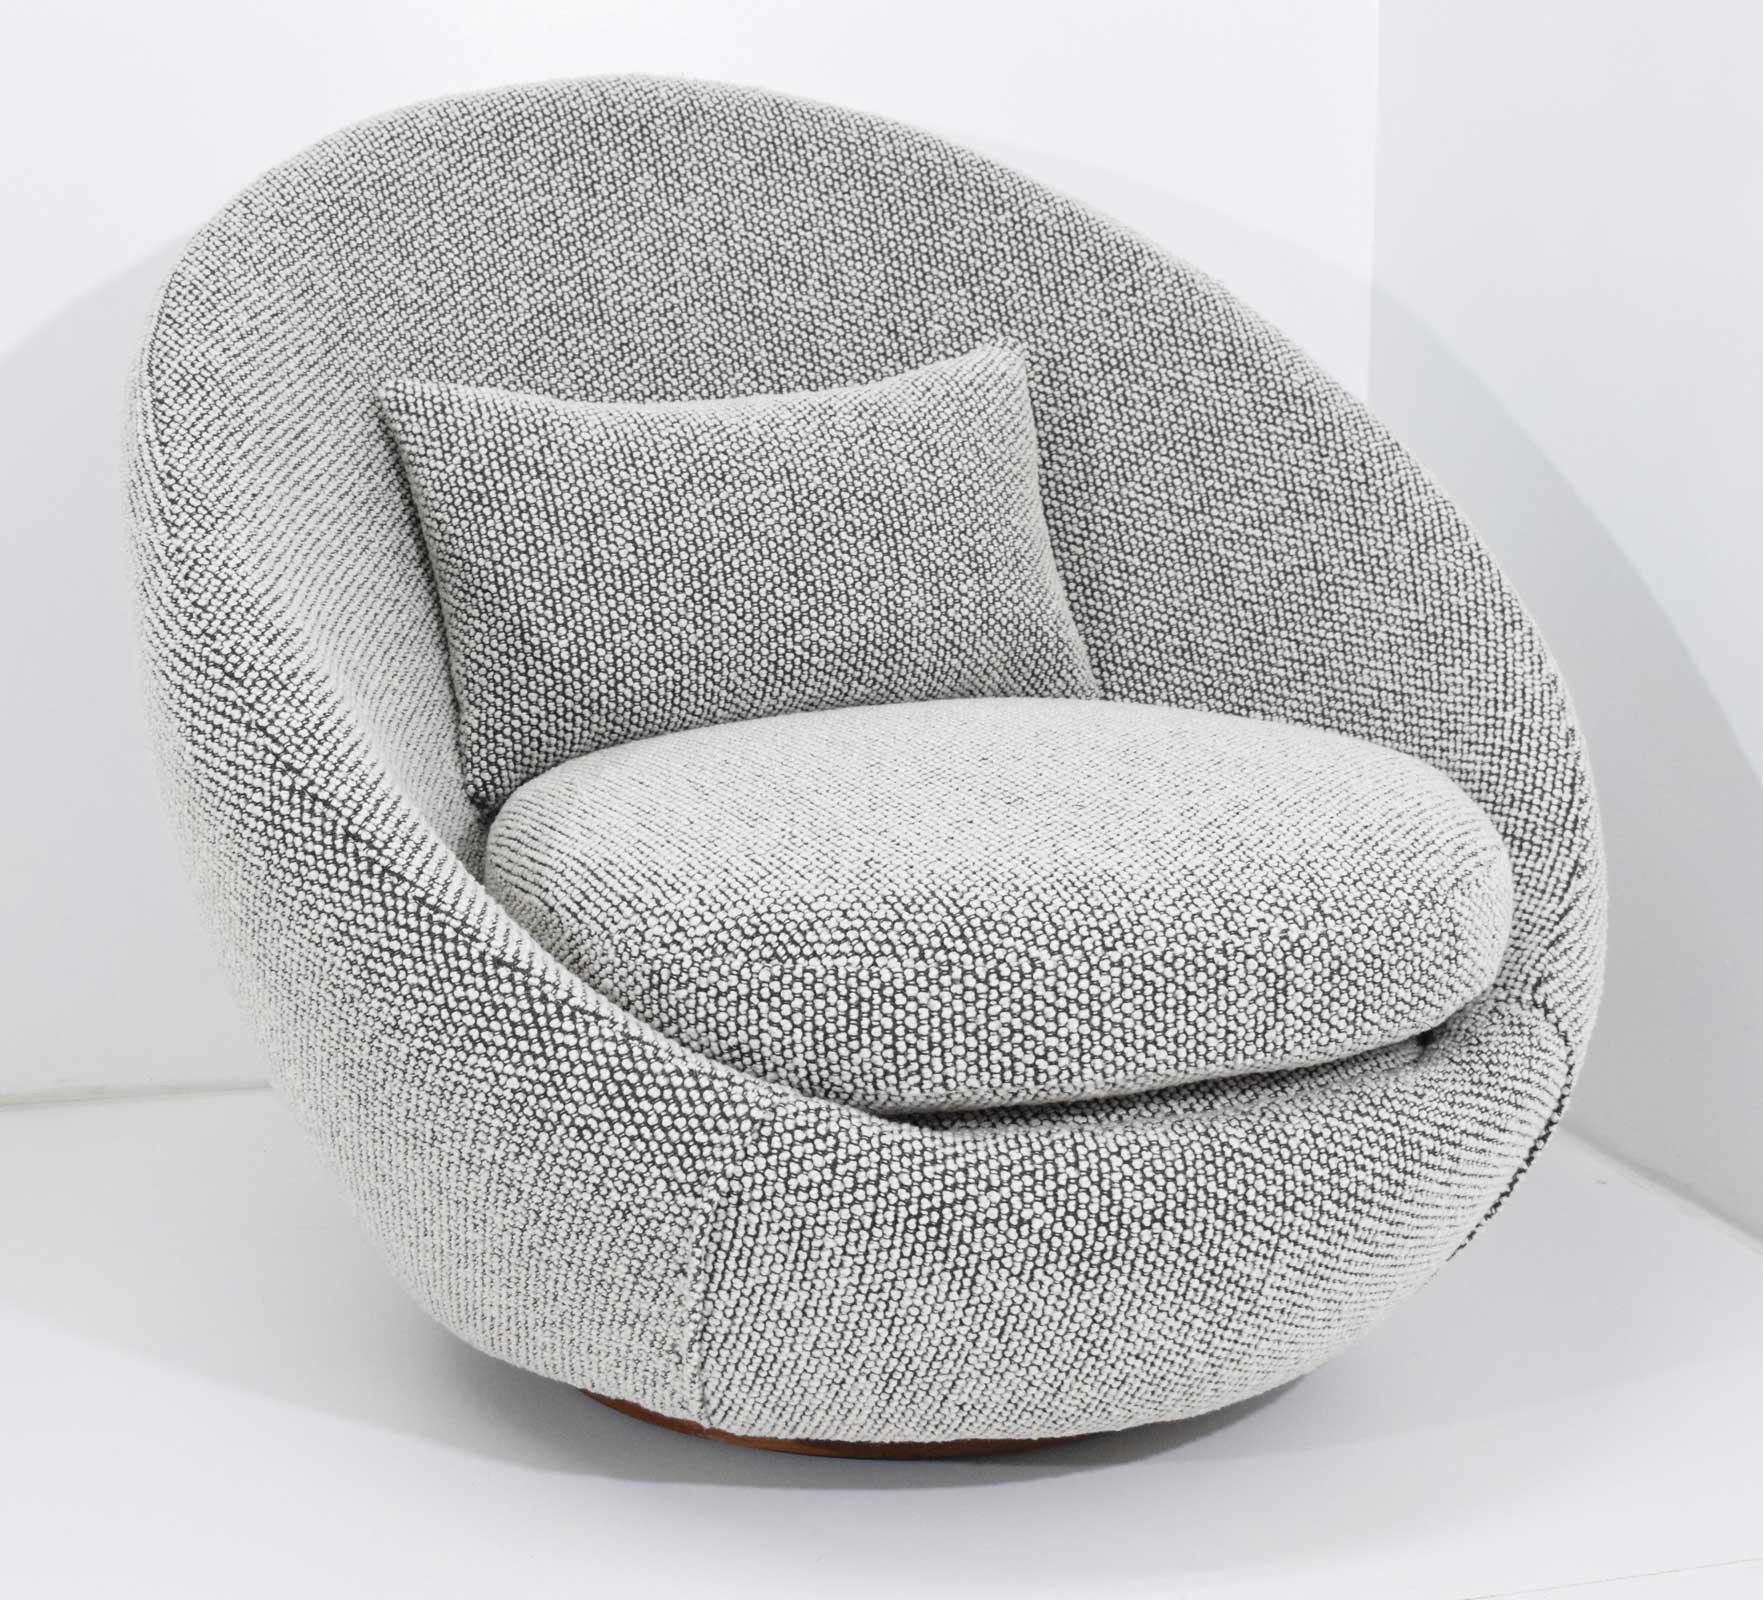 North American Milo Baughman Egg Swivel Chair in Black and White Nubby Upholstery